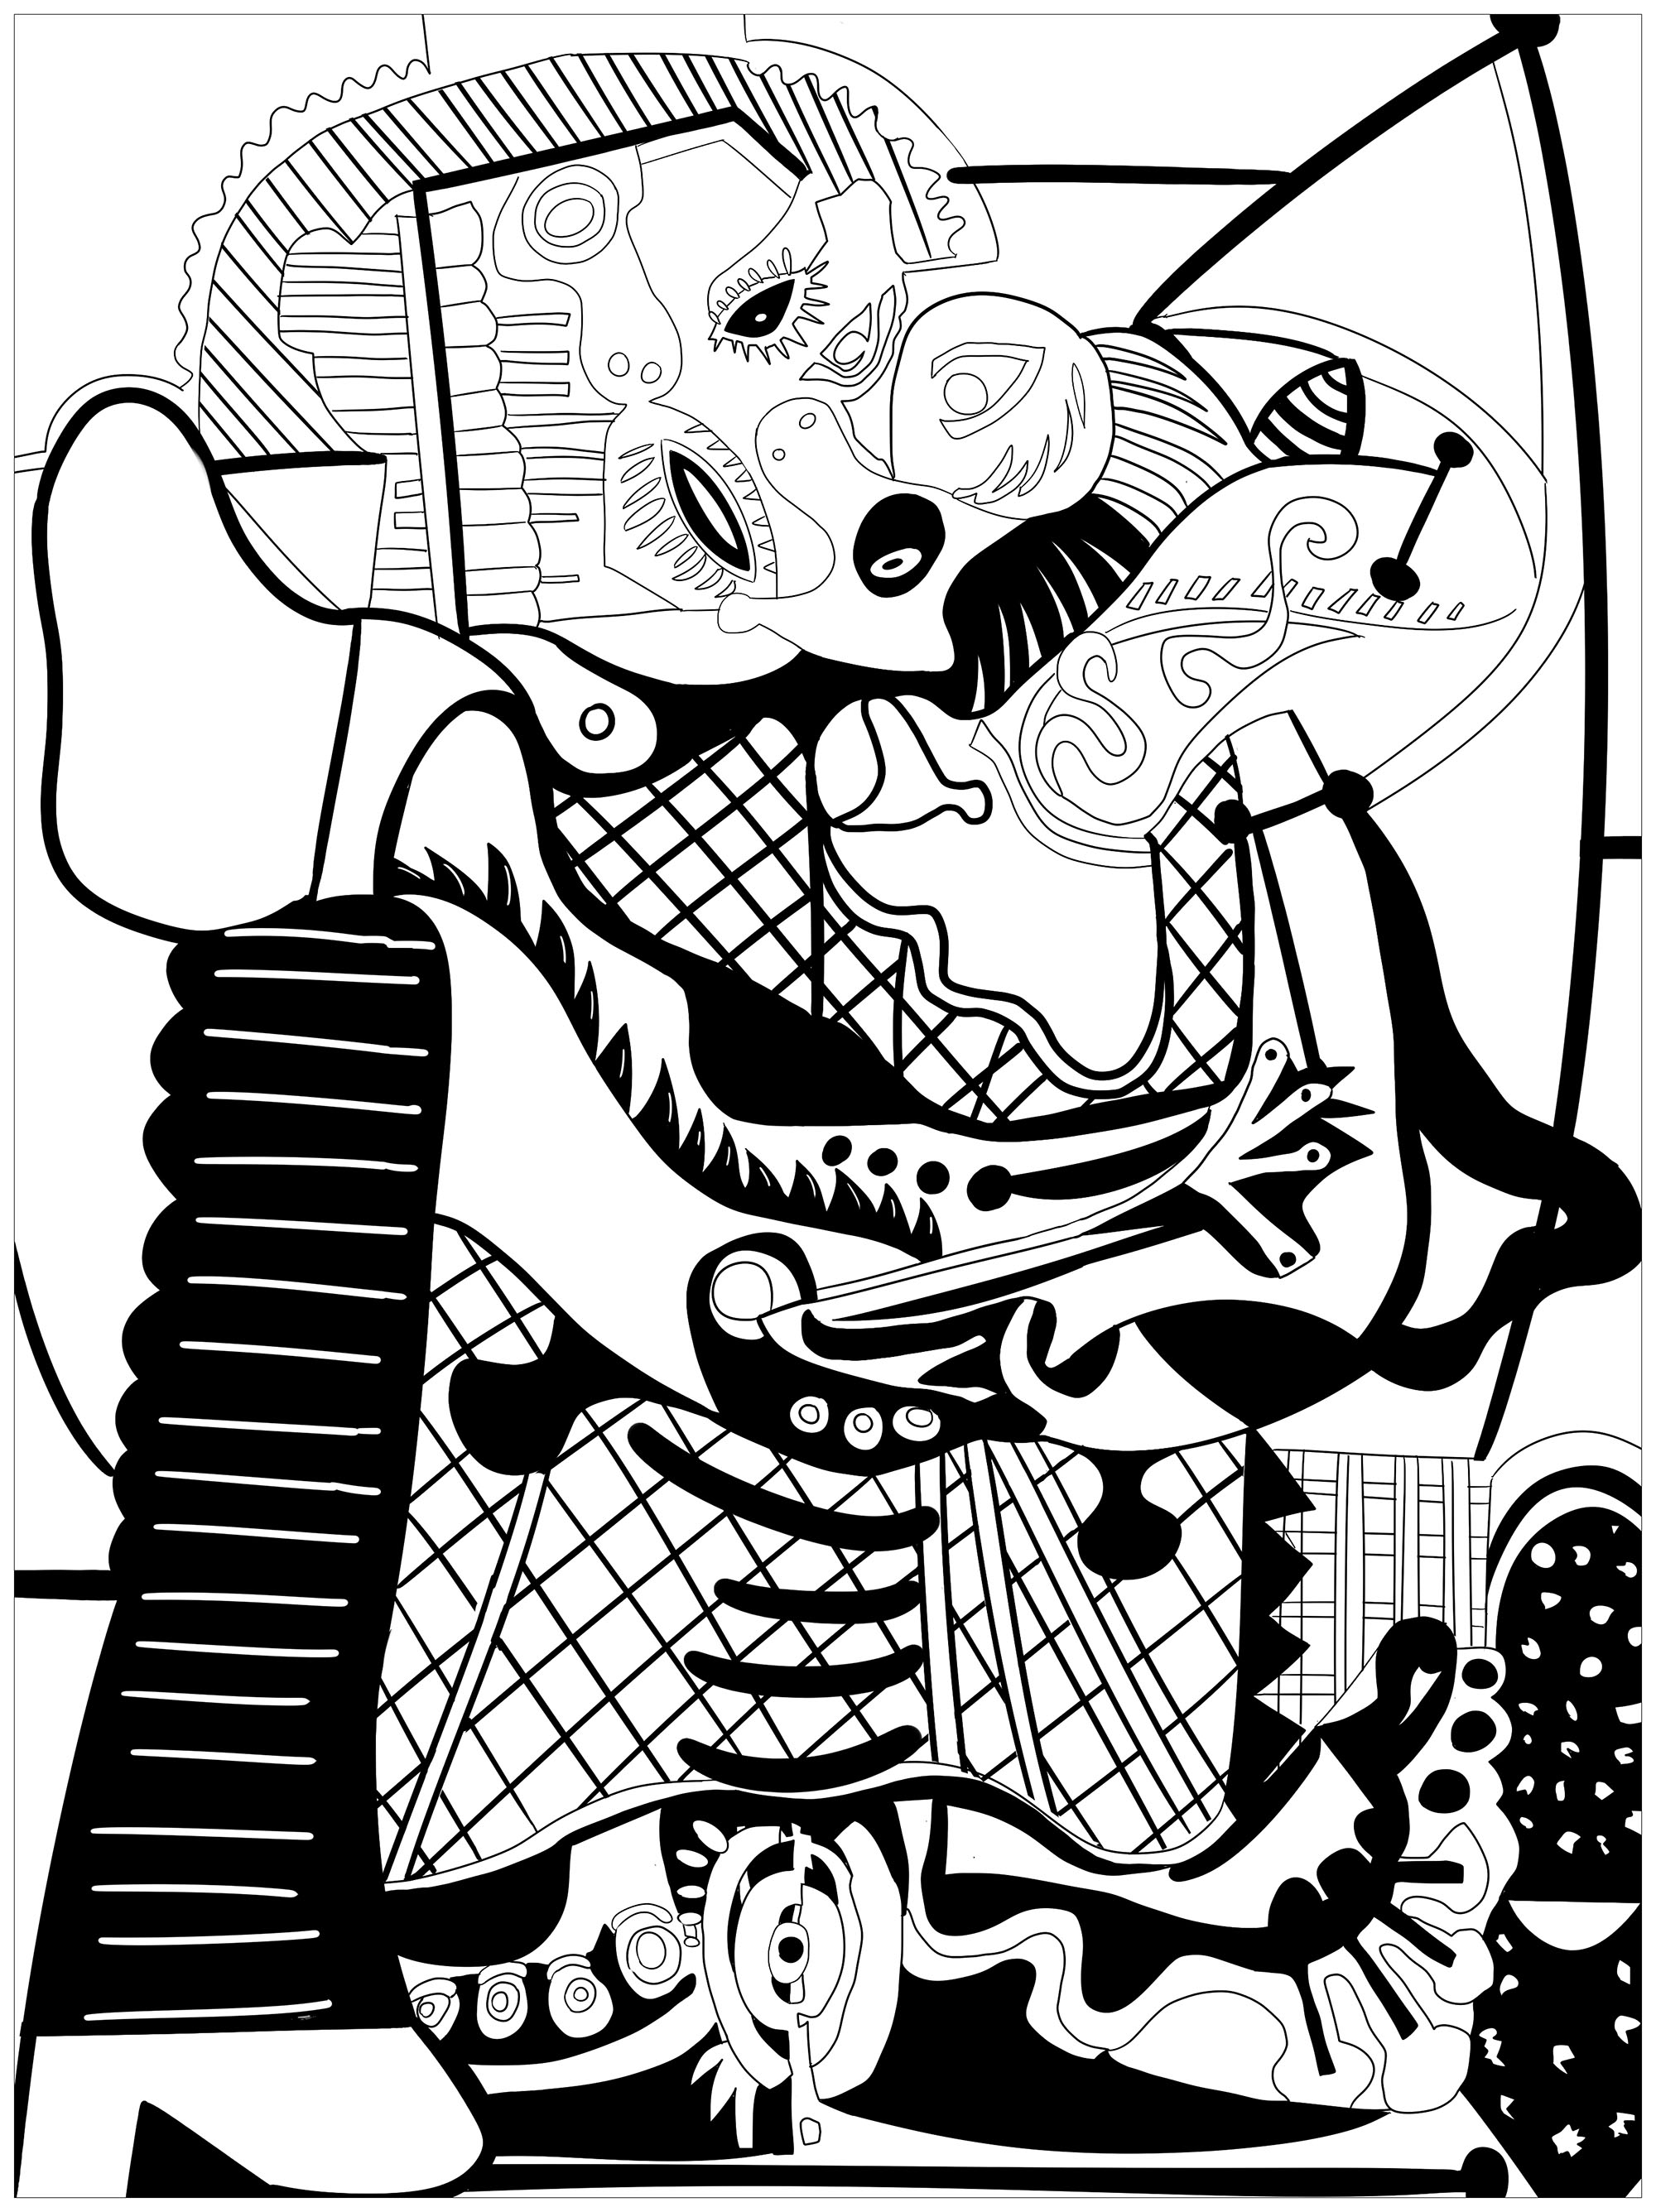 Beautiful Pablo Picasso coloring page